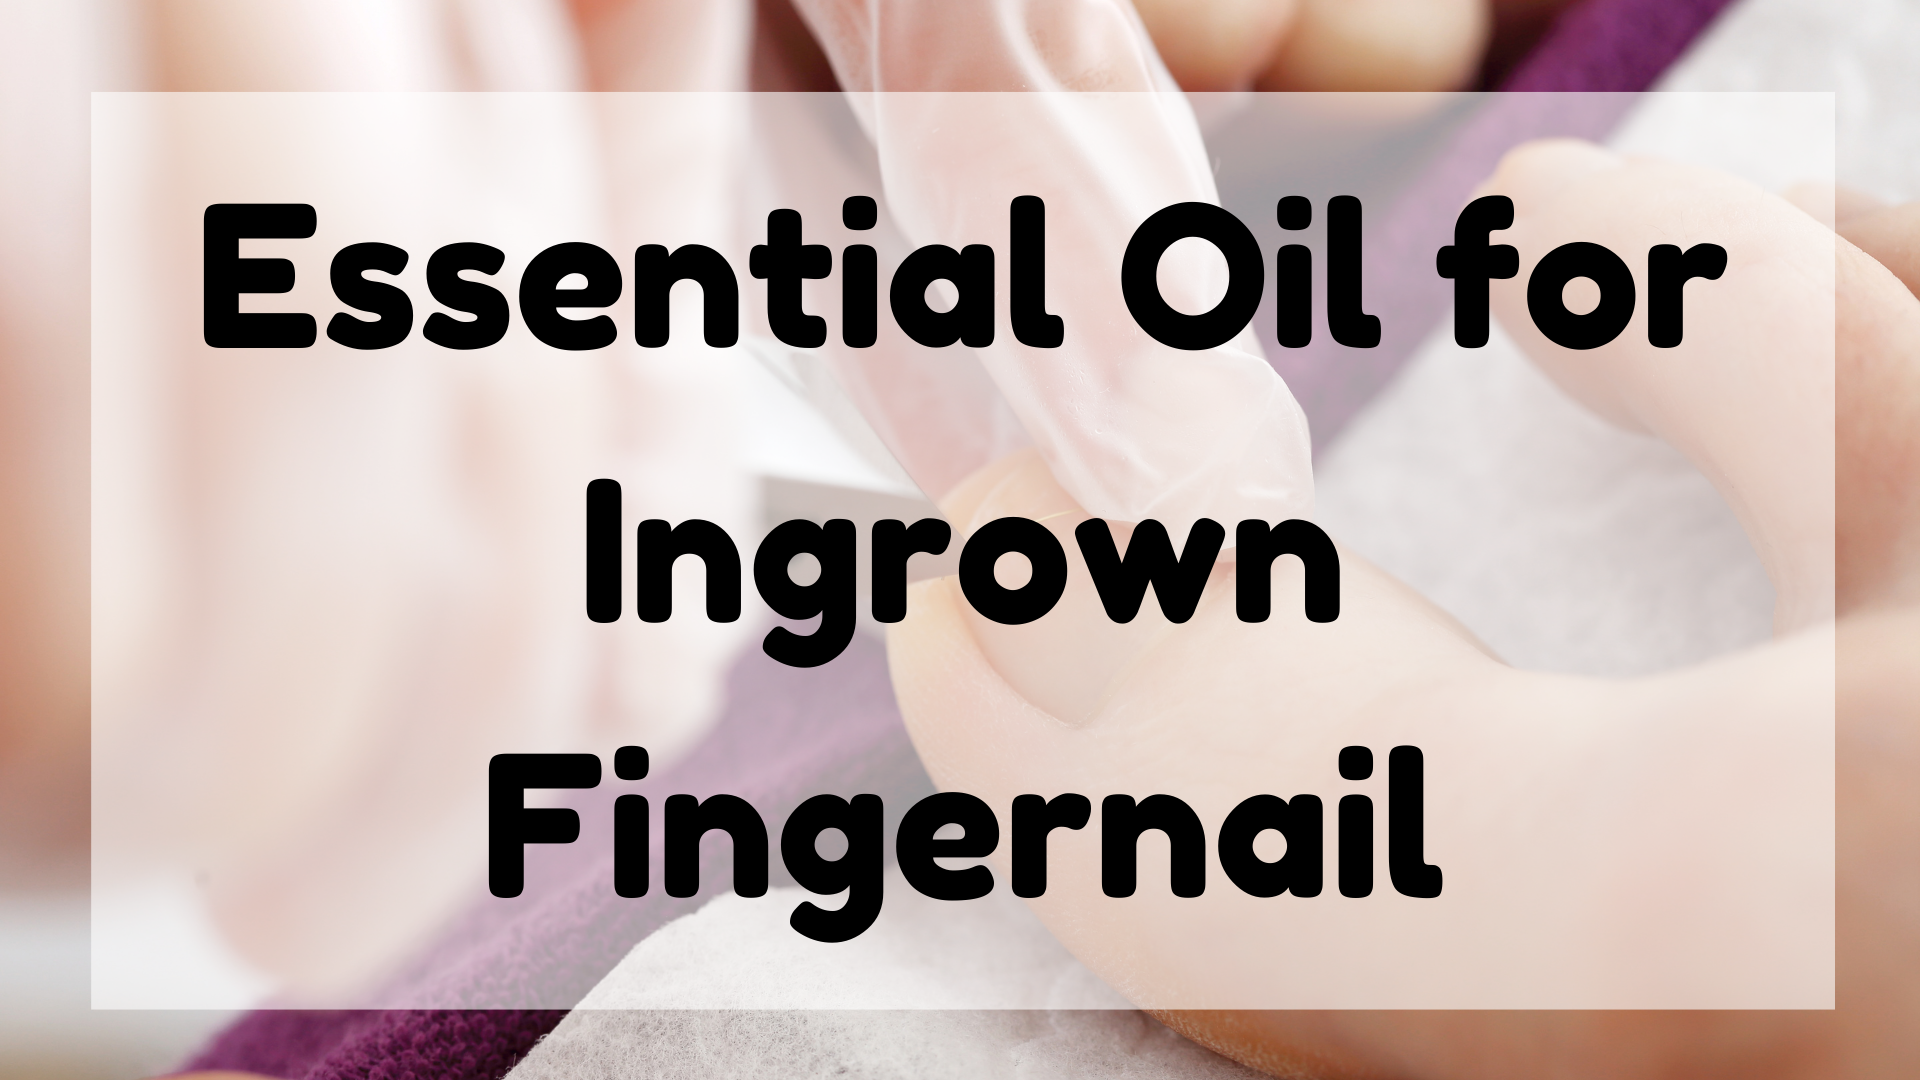 Essential Oil for Ingrown Fingernail featured image